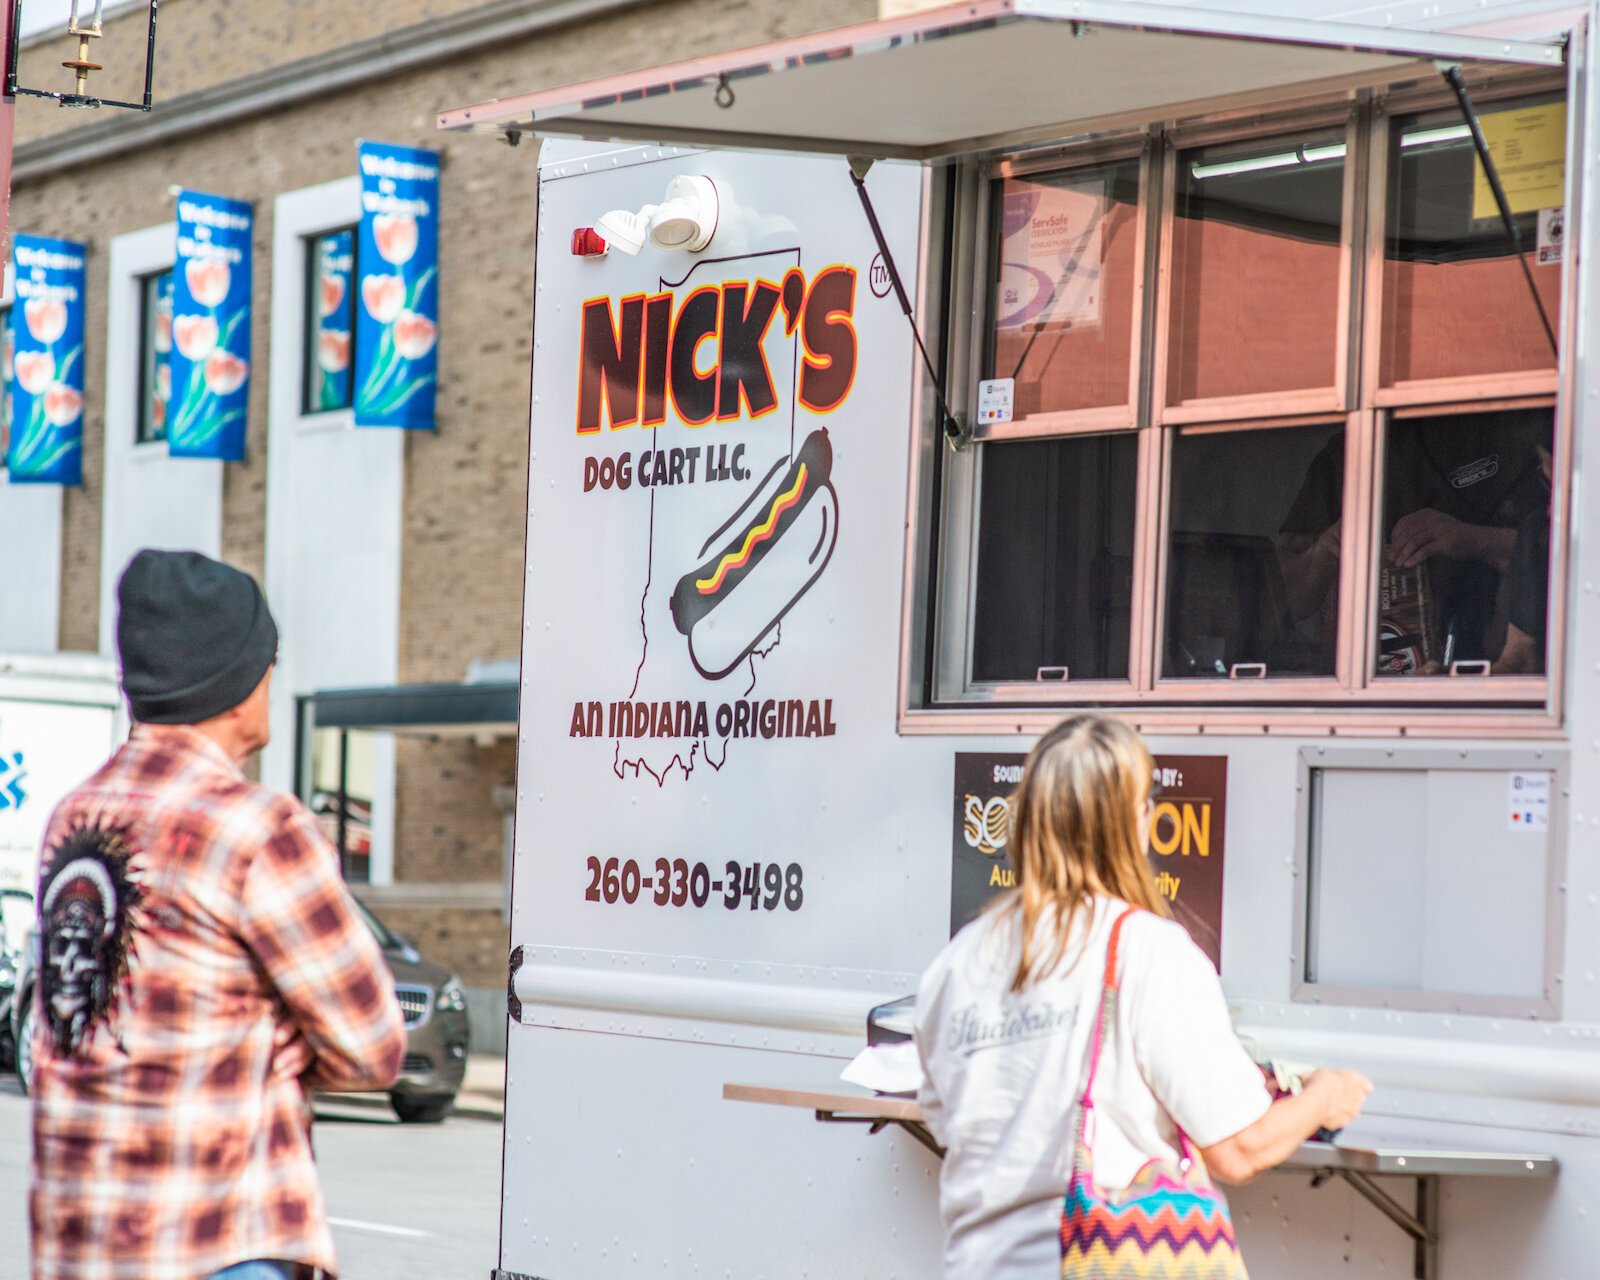 Customers waiting for all-beef hot dogs from Nick's Hot Dog Cart.